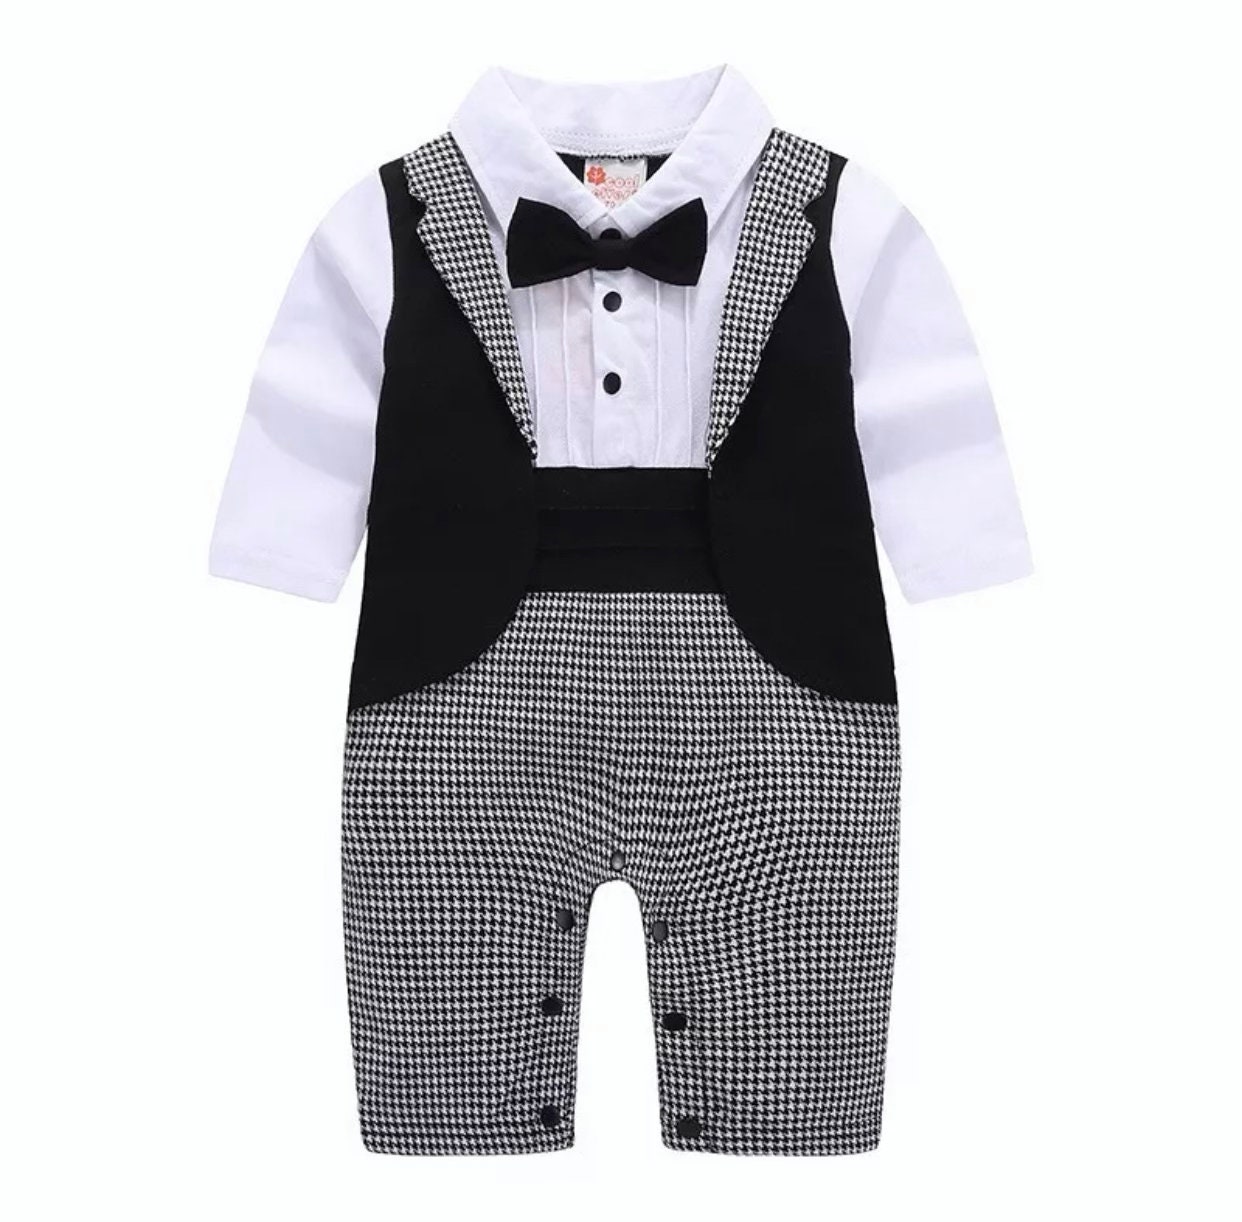 Baby Boy Suit Romper Jumpsuit Perfect for Any Occasion - Etsy